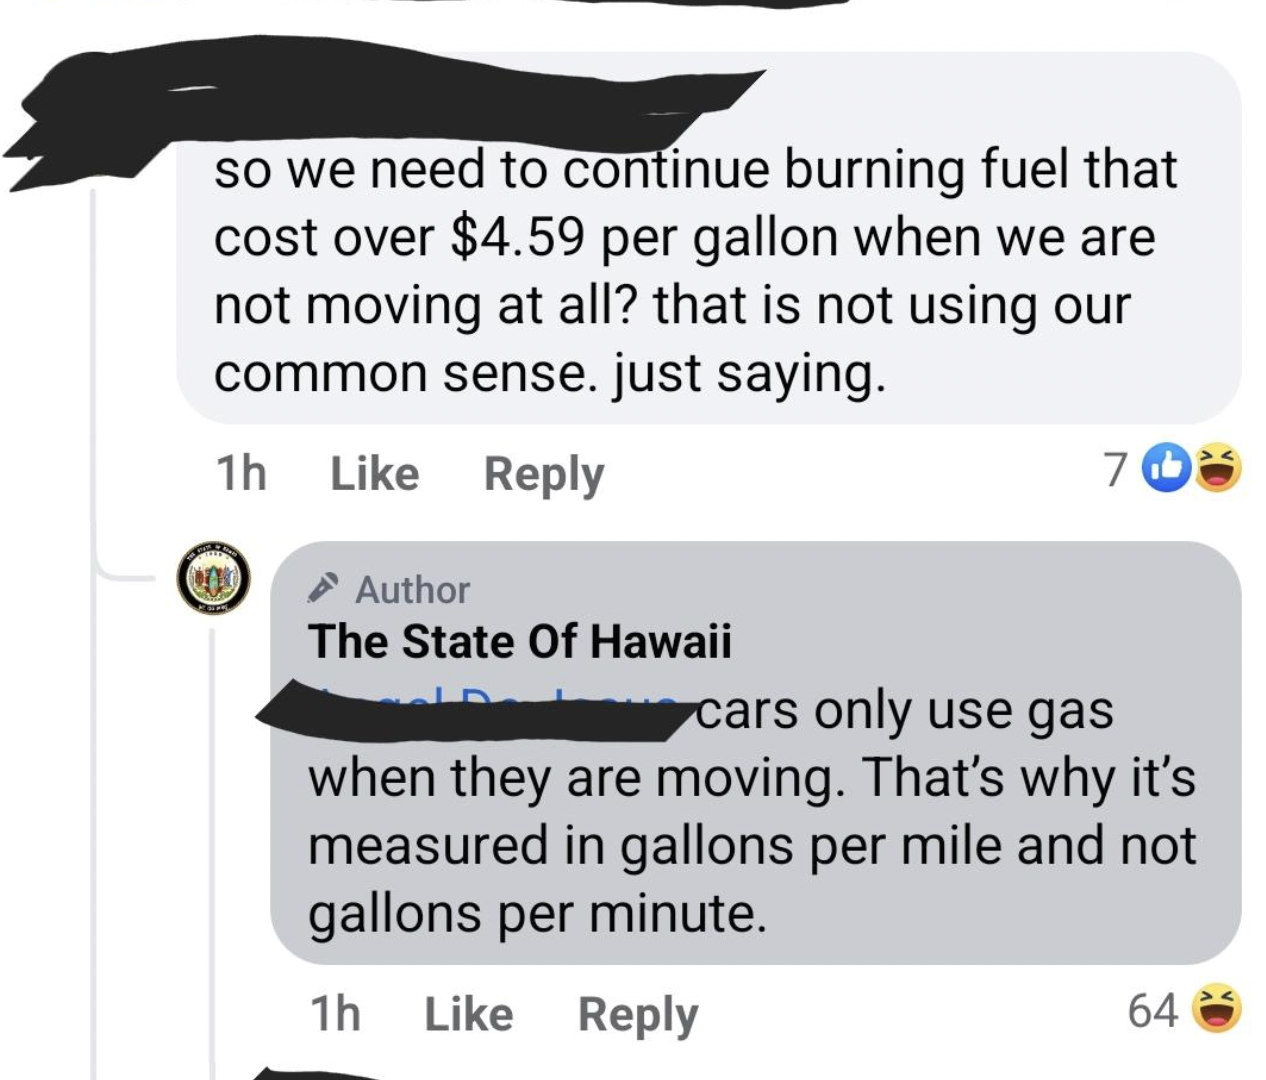 Confidently incorrect - material - so we need to continue burning fuel that cost over $4.59 per gallon when we are not moving at all? that is not using our common sense. just saying. 1h Author The State Of Hawaii 70 cars only use gas when they are moving